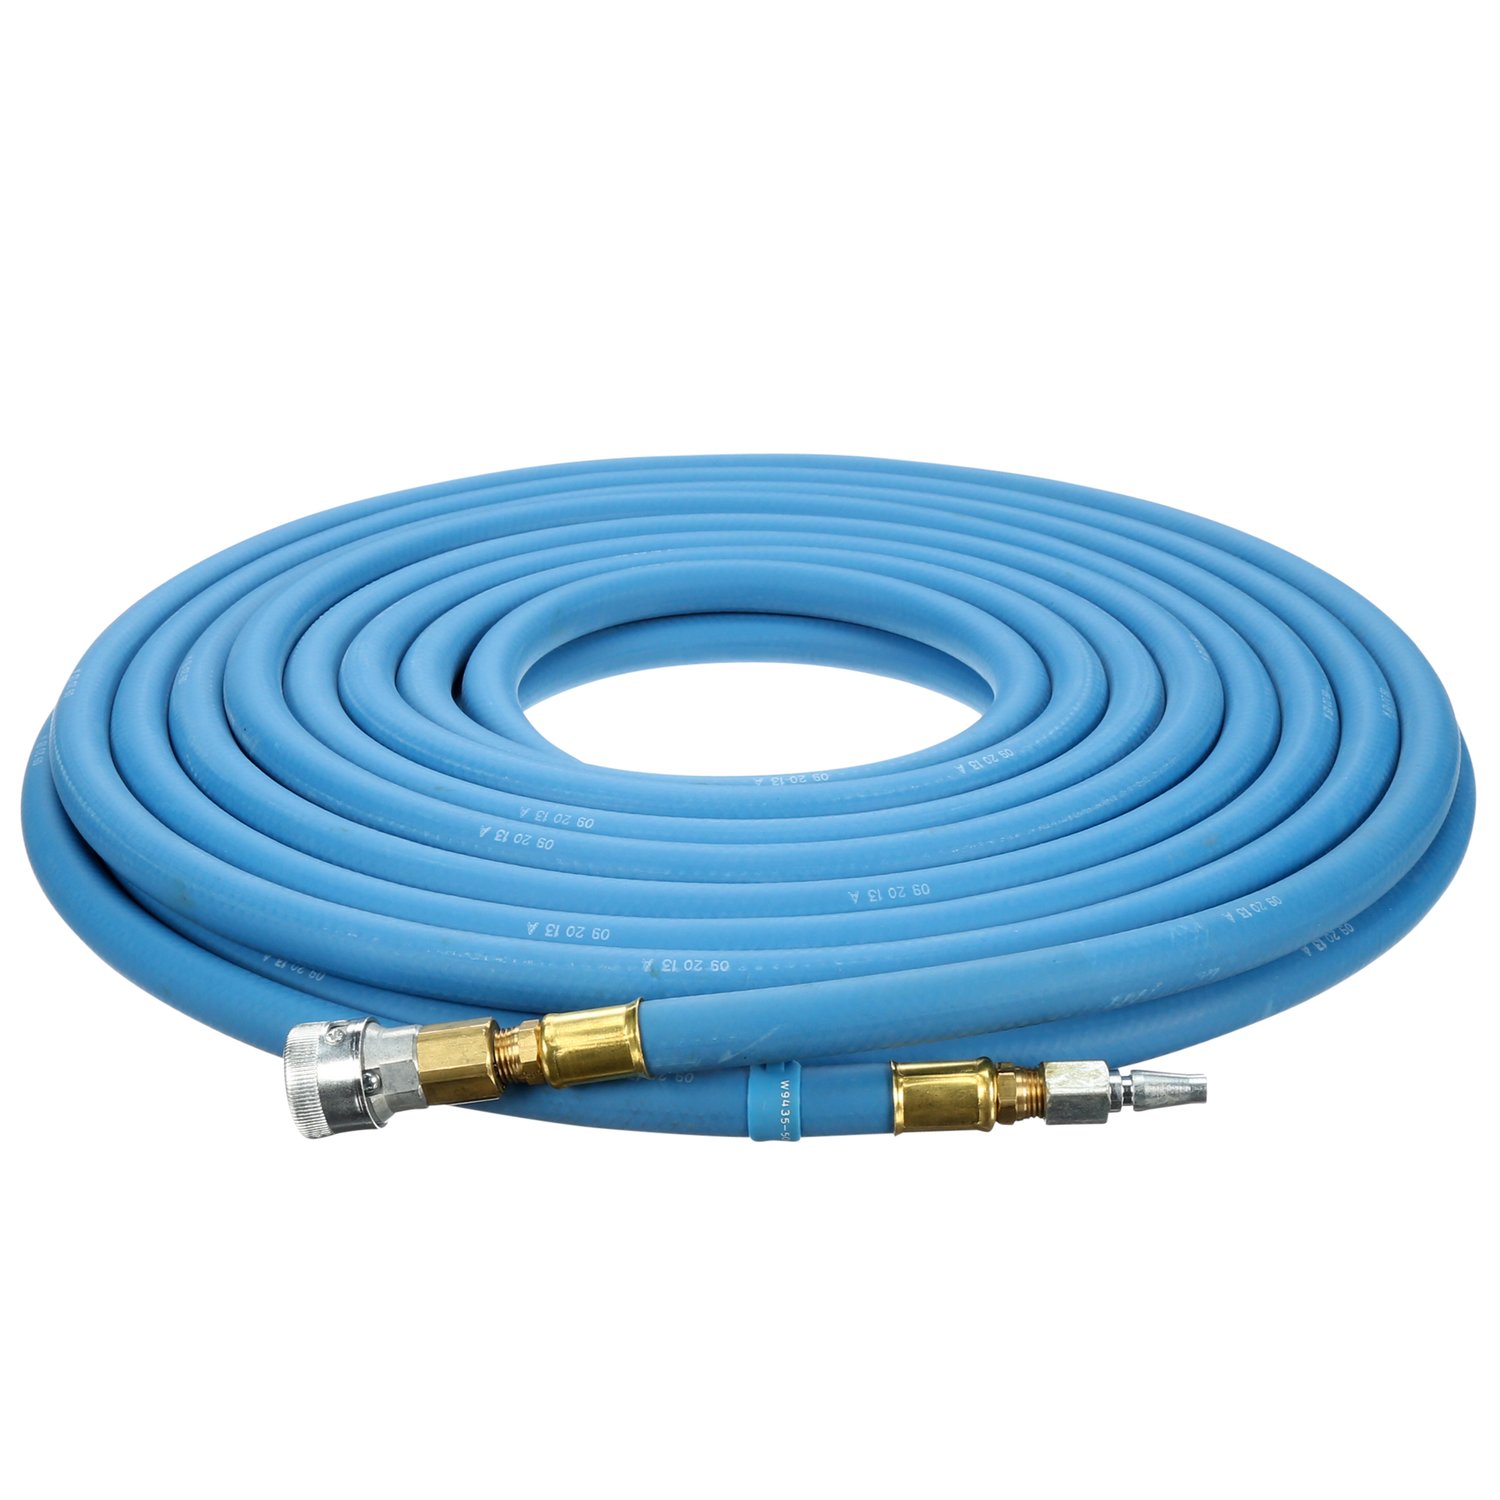 7000052155 - 3M Supplied Air Hose W-9445-50, 50 ft, 3/8 in ID, Schrader Fittings,
High Pressure 1/Case